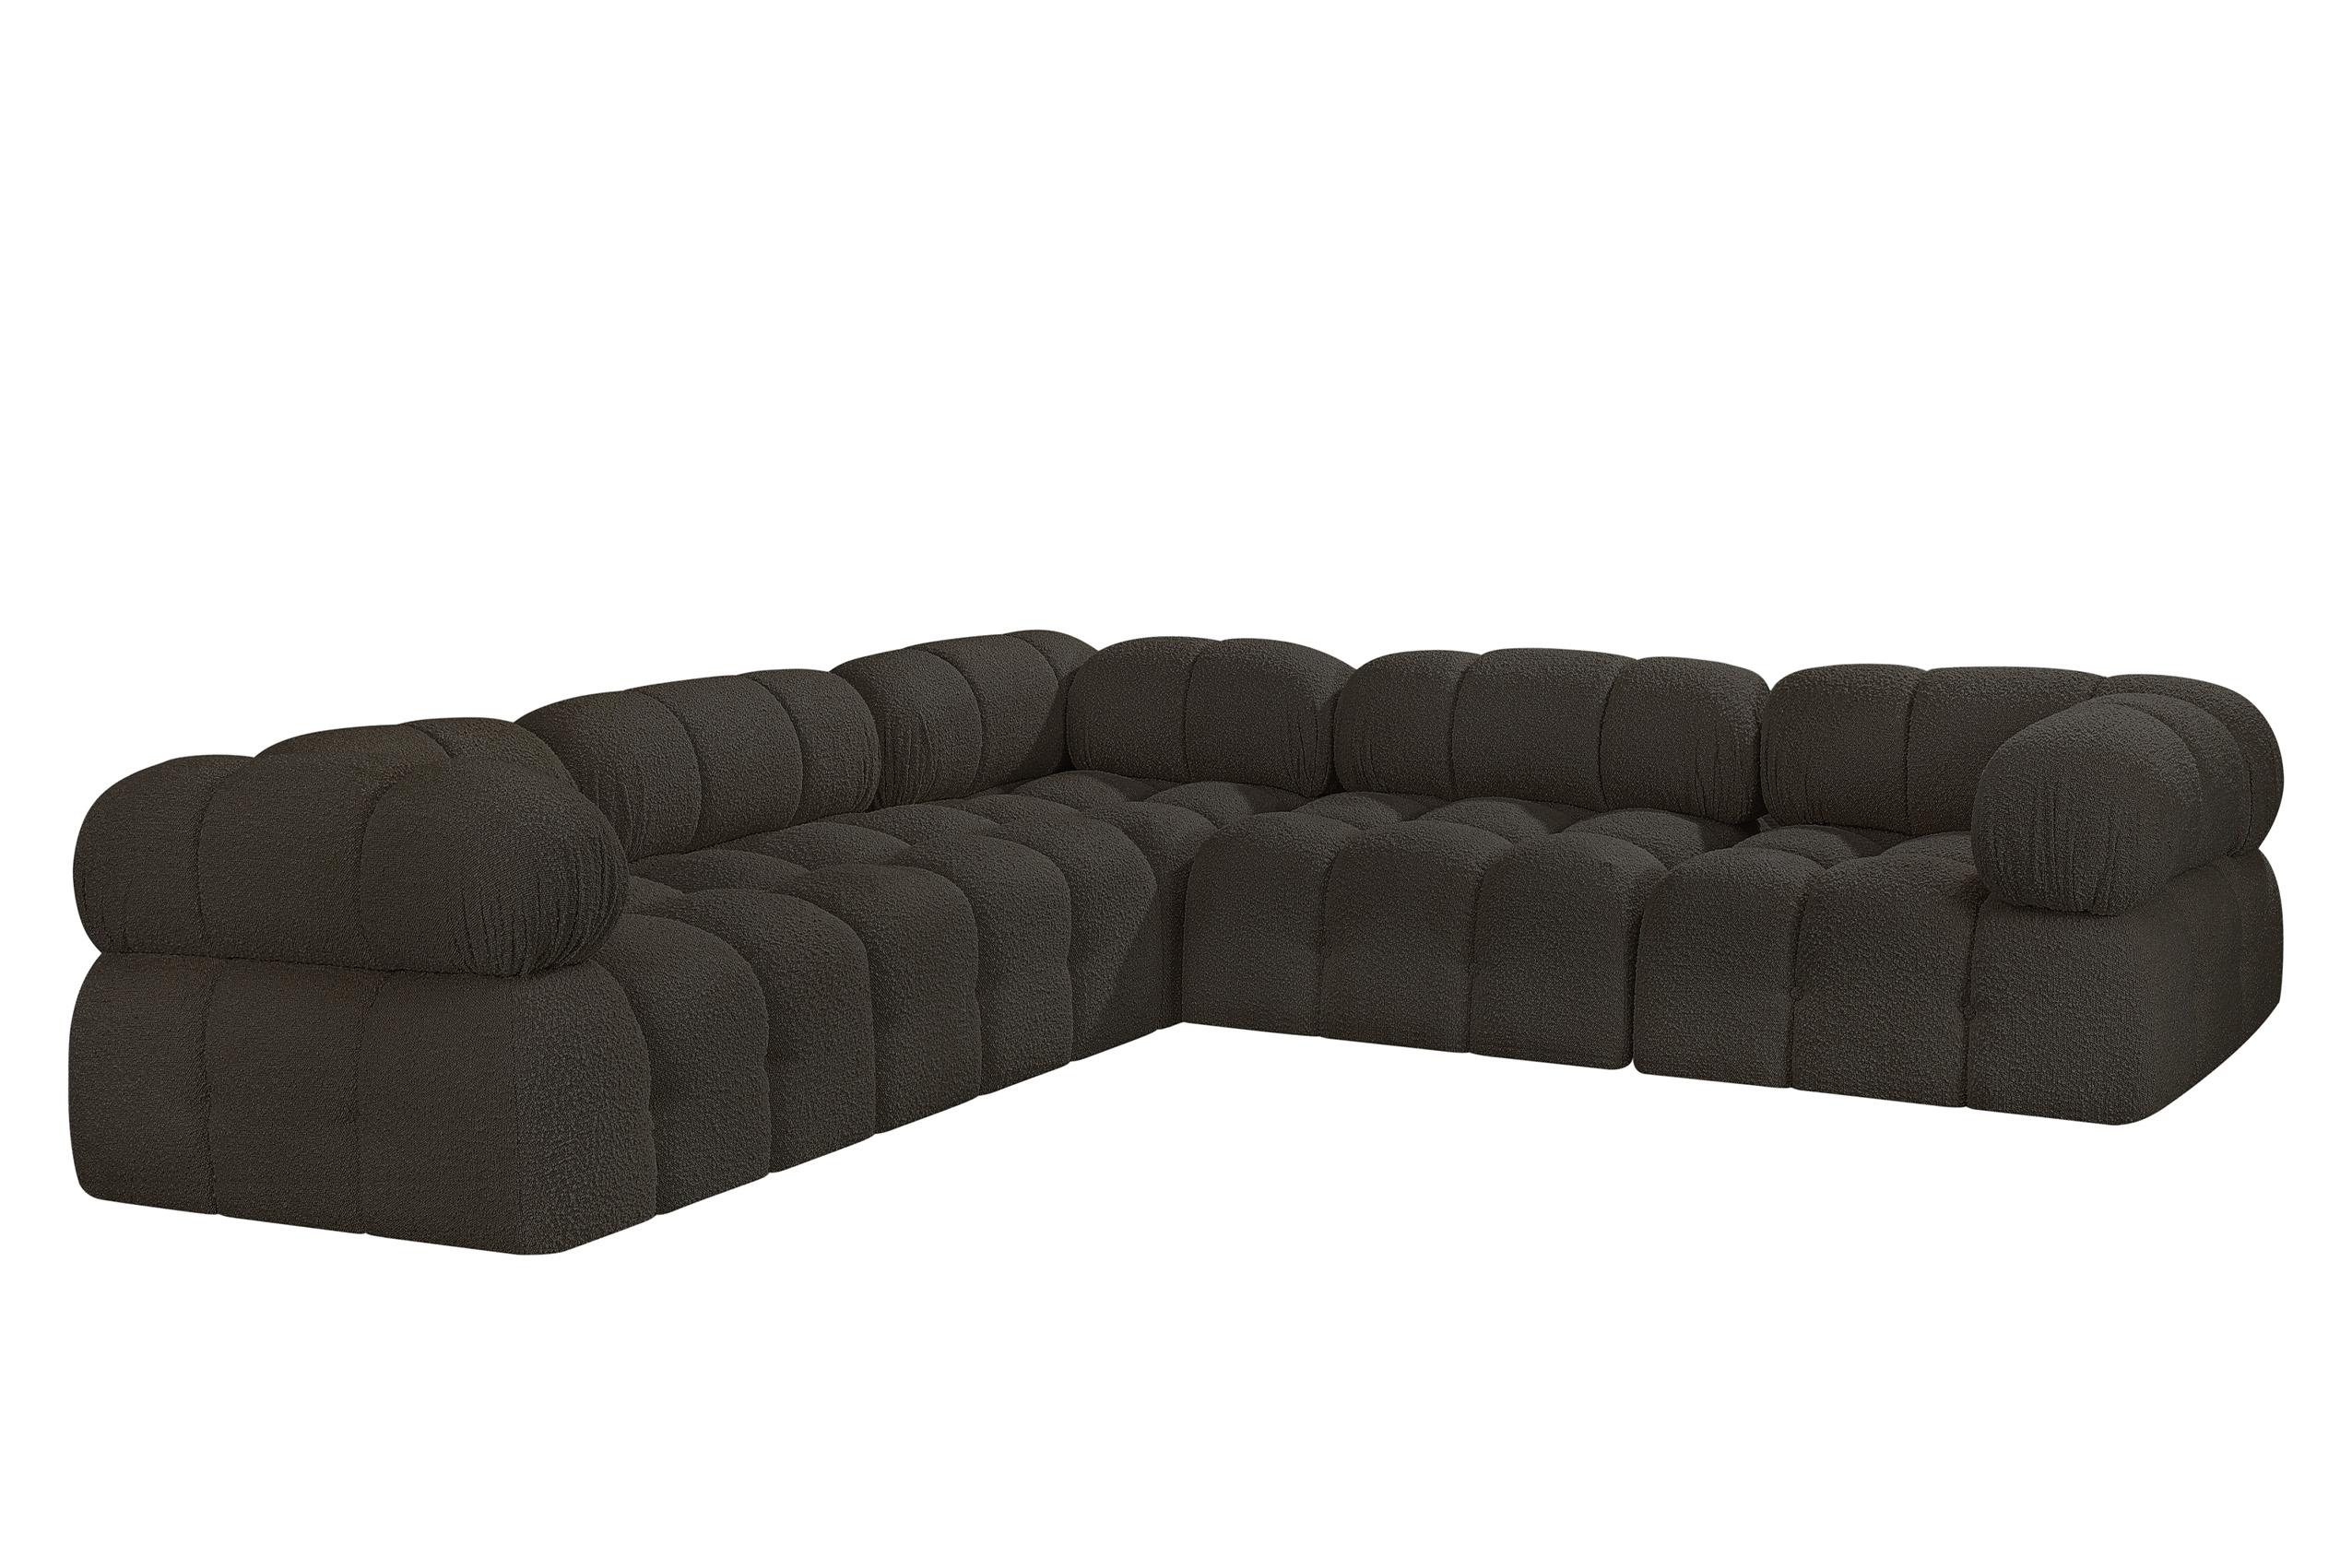 Contemporary, Modern Modular Sectional AMES 611Brown-Sec5D 611Brown-Sec5D in Brown 